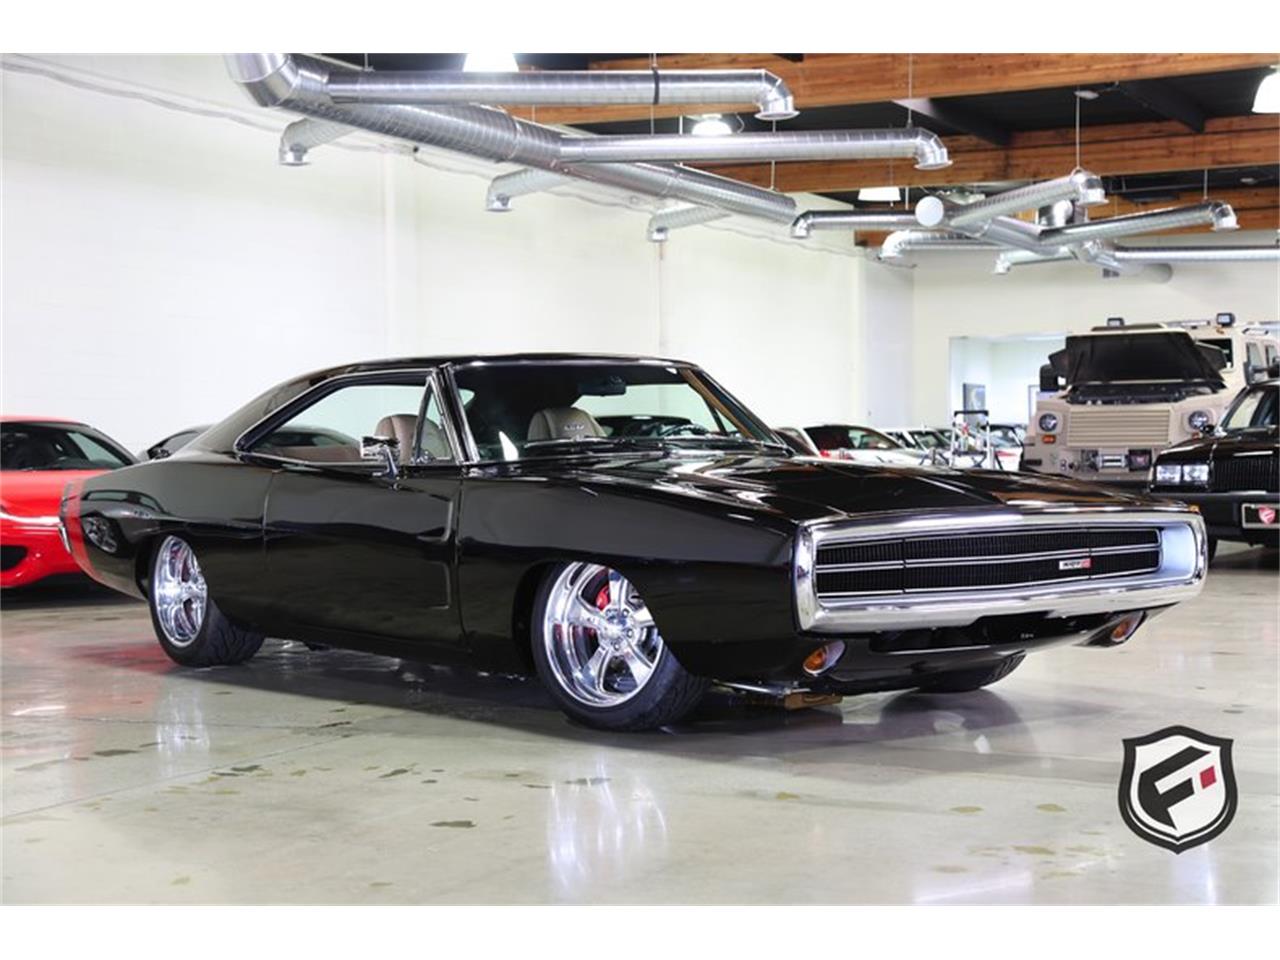 1970 Dodge Charger For Sale Classiccars Com Cc 1005213